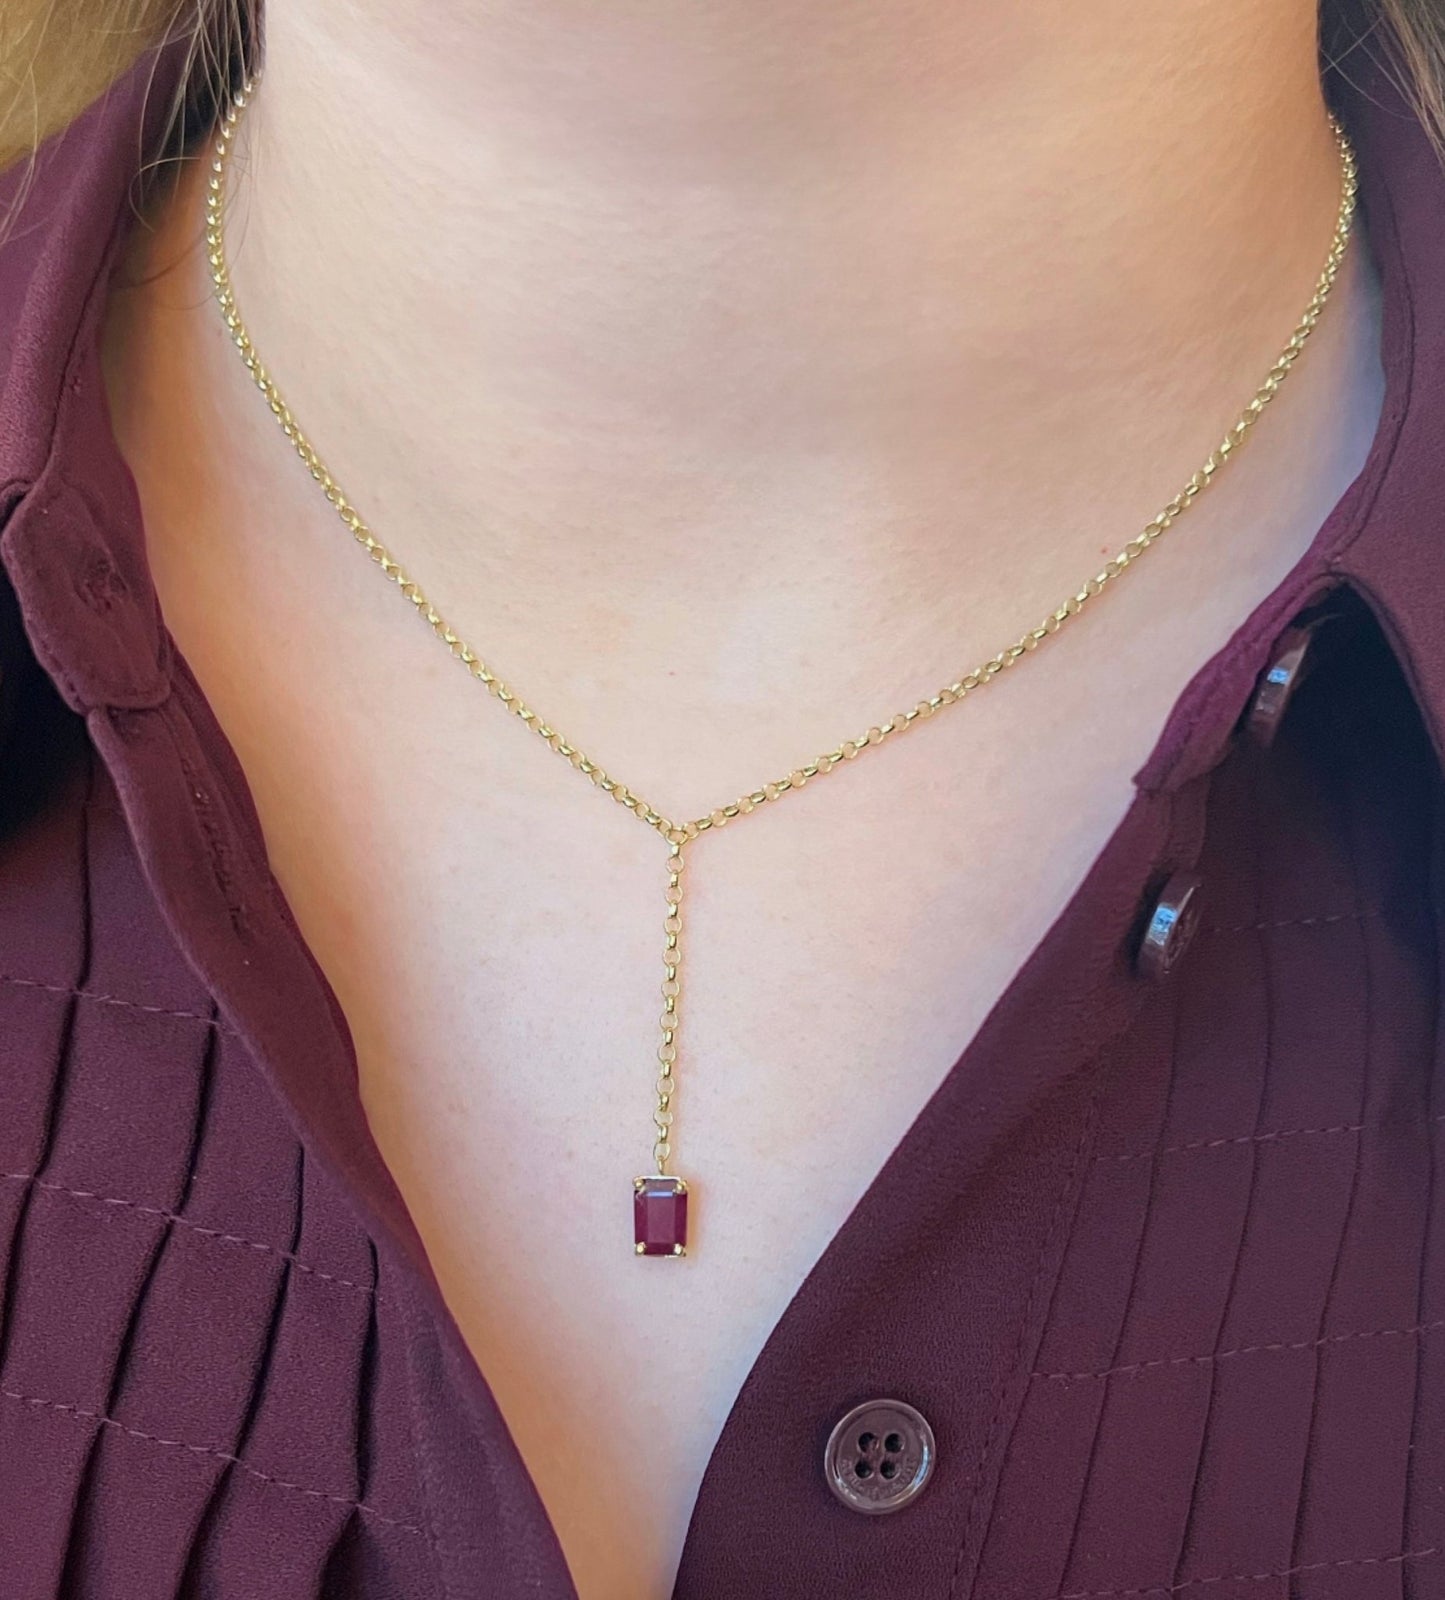 Maris Necklace in Ruby - 18k Gold - Lynor